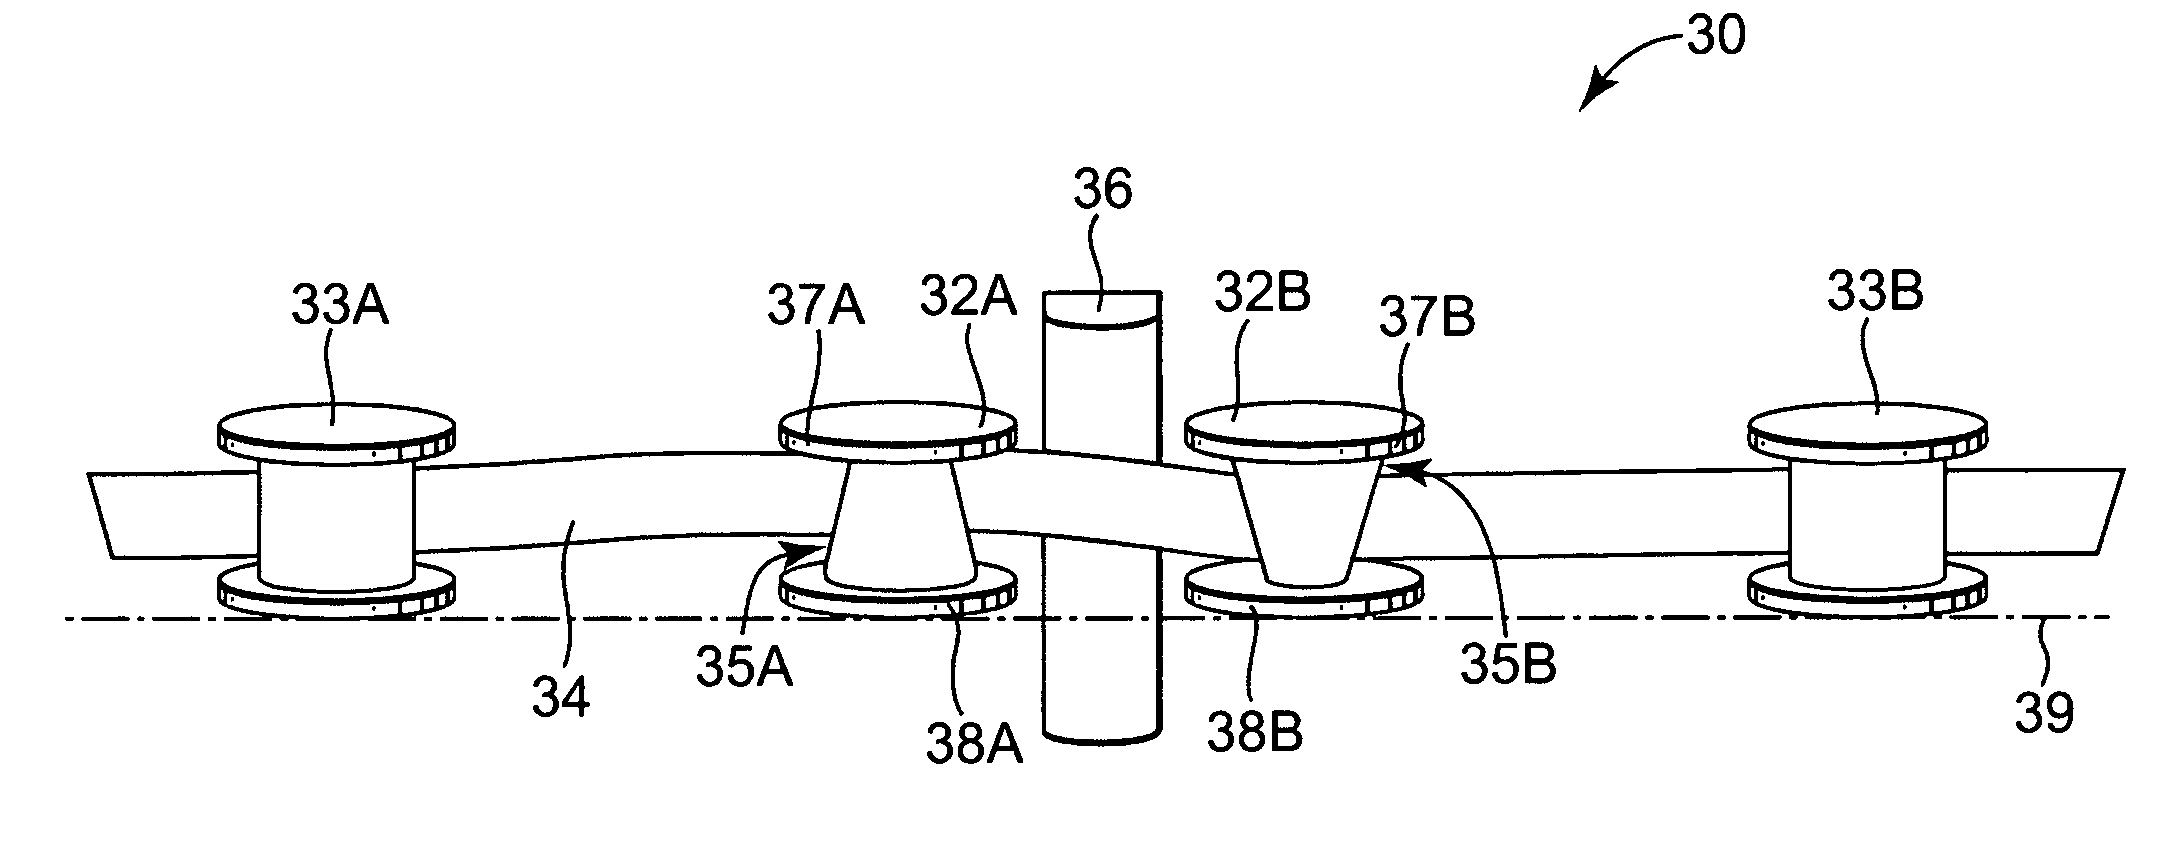 Data storage tape guiding systems using tapered guides